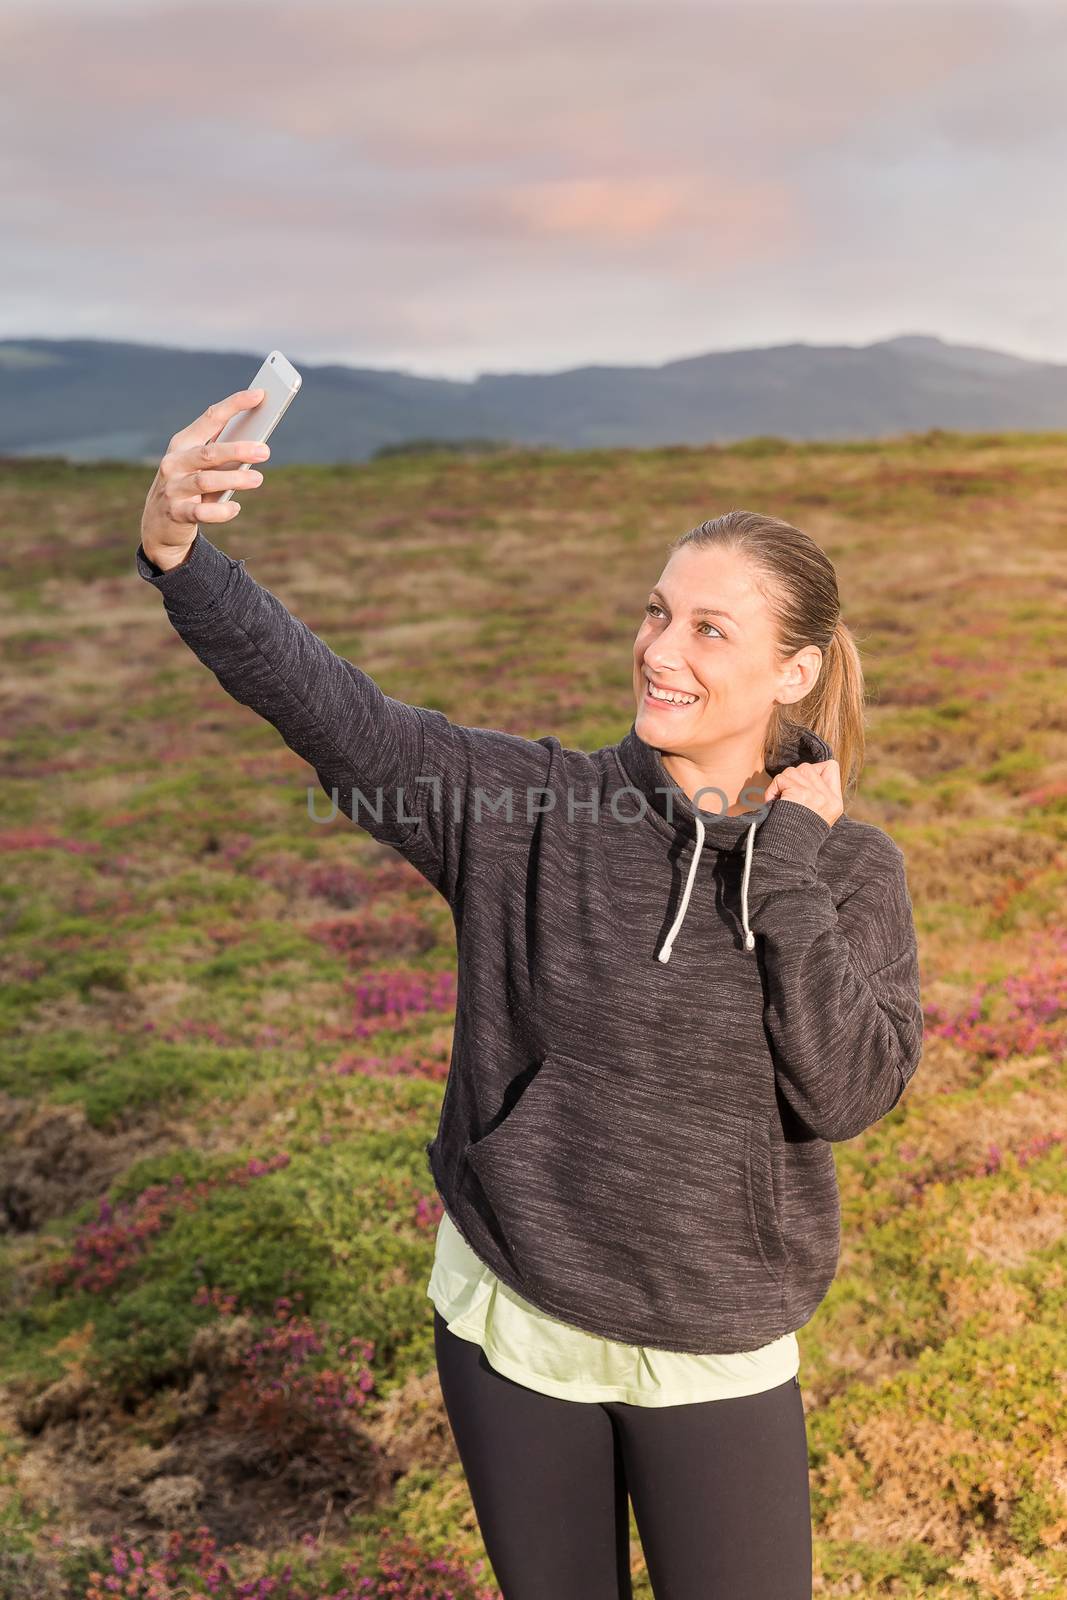 Girl taking a self-portrait with a mobile phone in the park at sunset by JRPazos